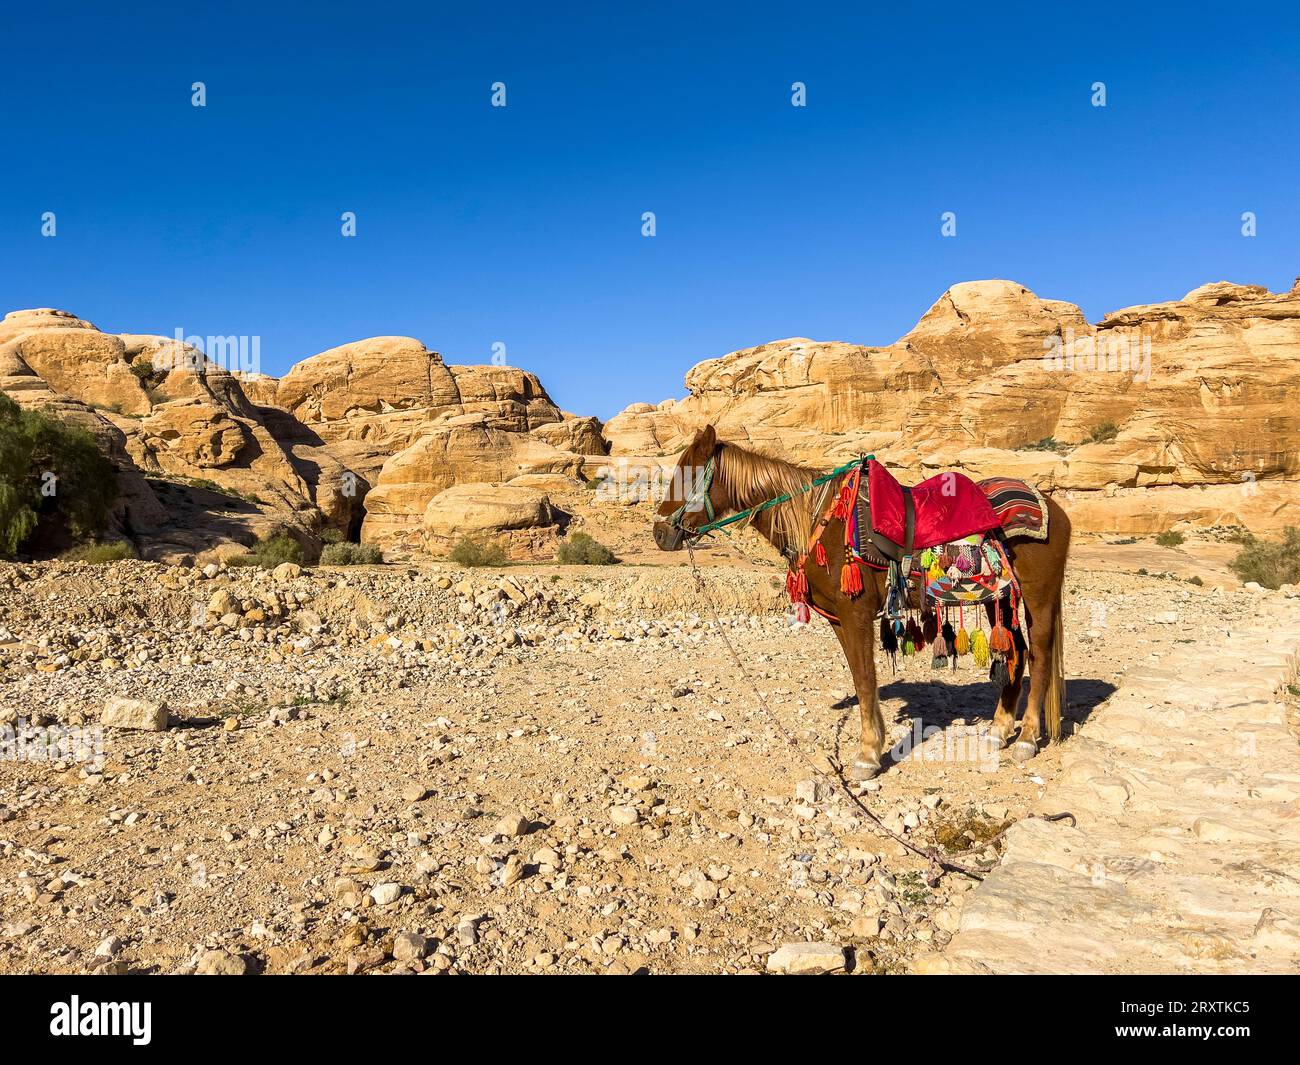 Jordanian horse, Petra Archaeological Park, UNESCO World Heritage Site, one of the New Seven Wonders of the World, Petra, Jordan, Middle East Stock Photo